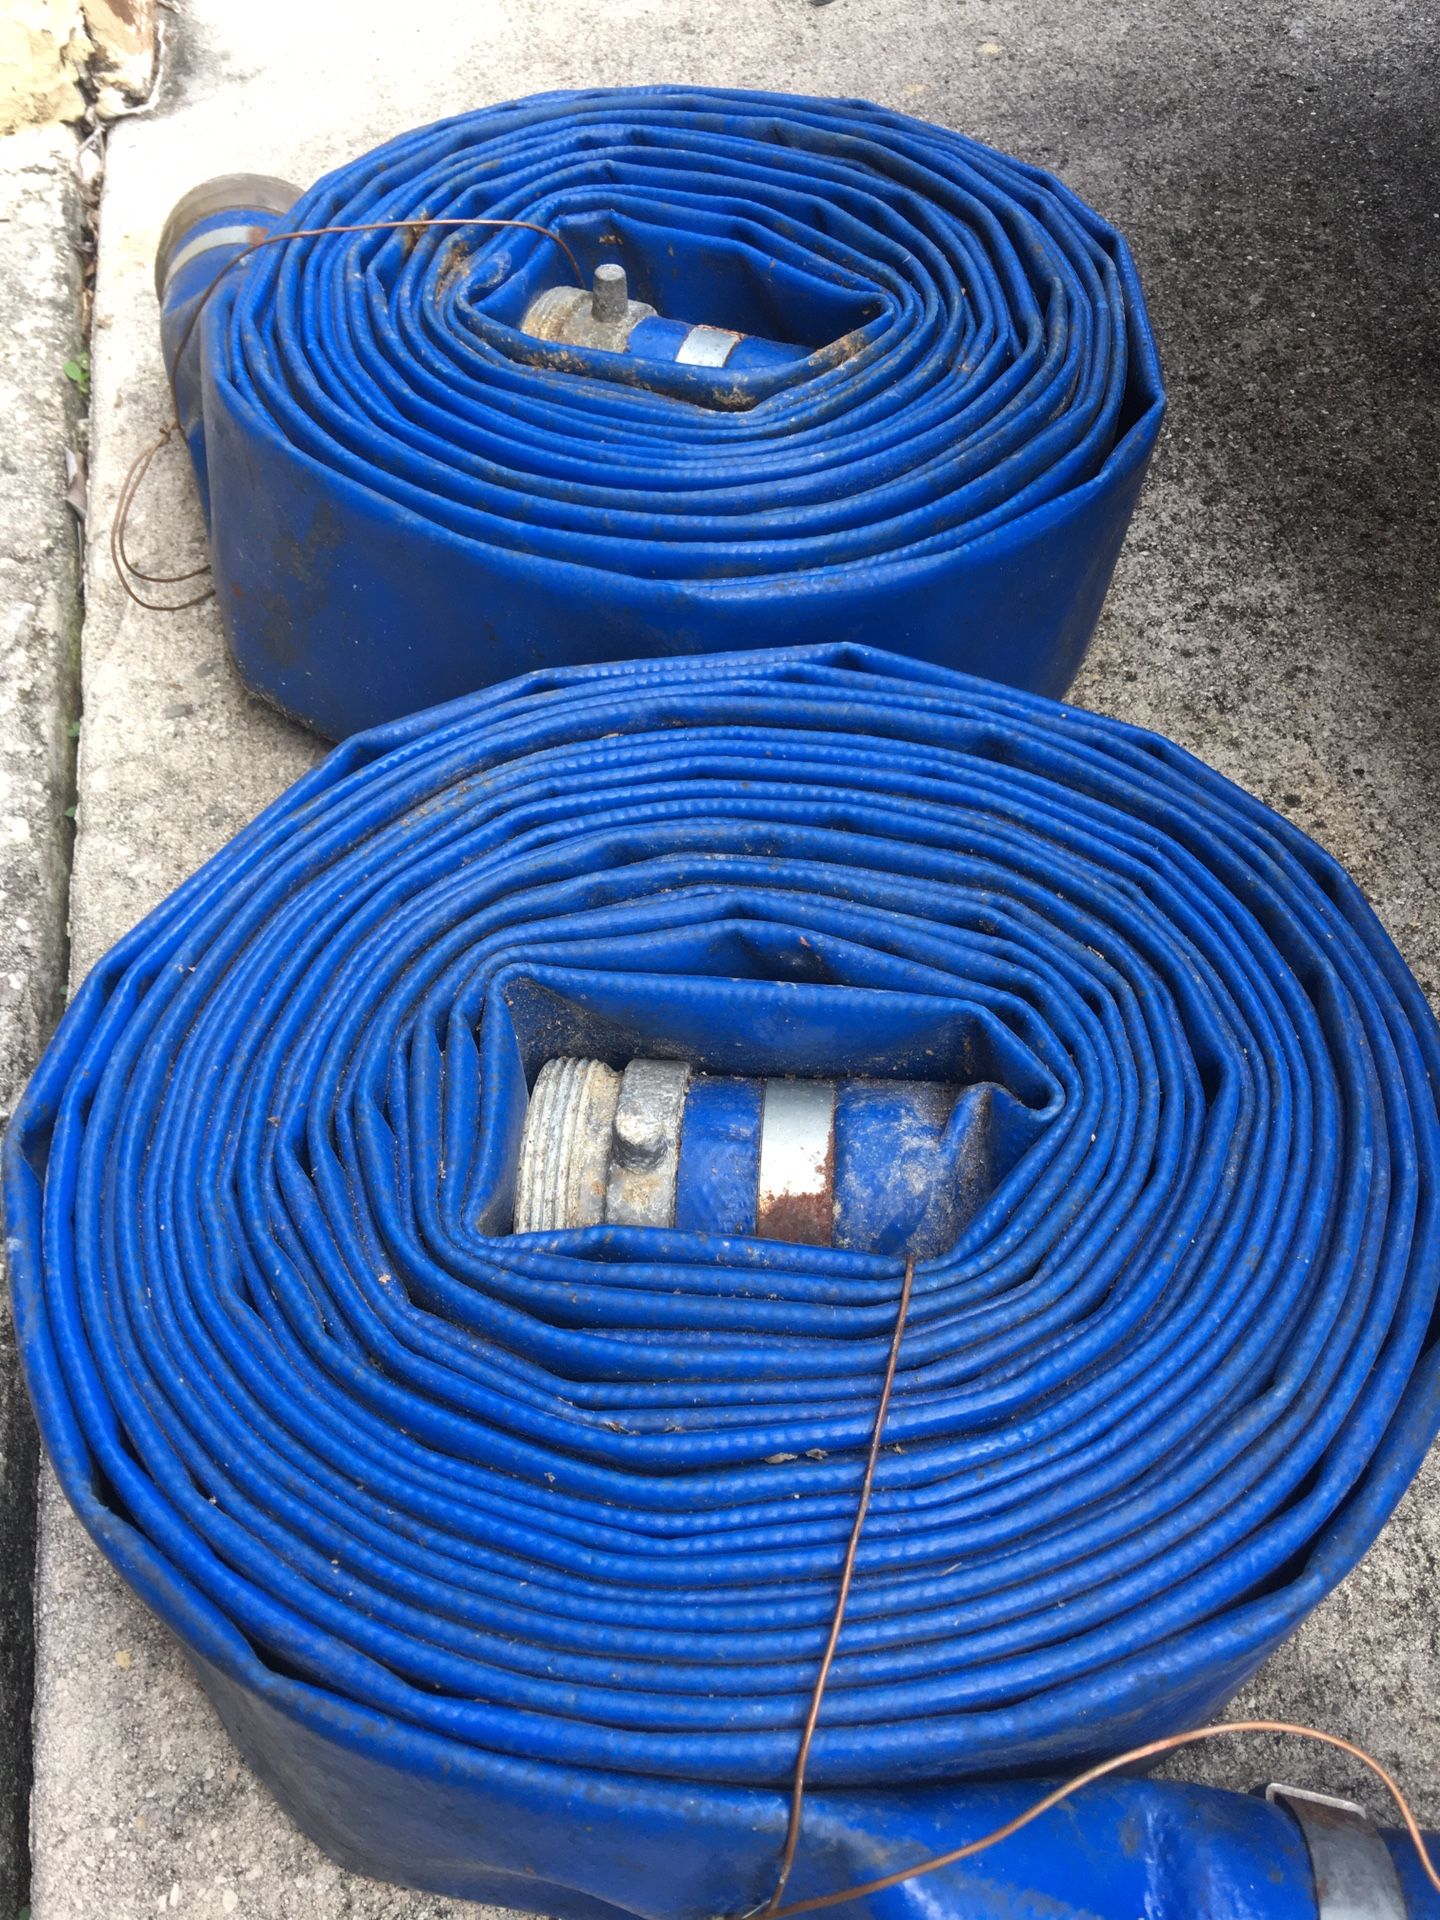 2 Discharge Hose Rolls 100’foot Total L, 3” Inches